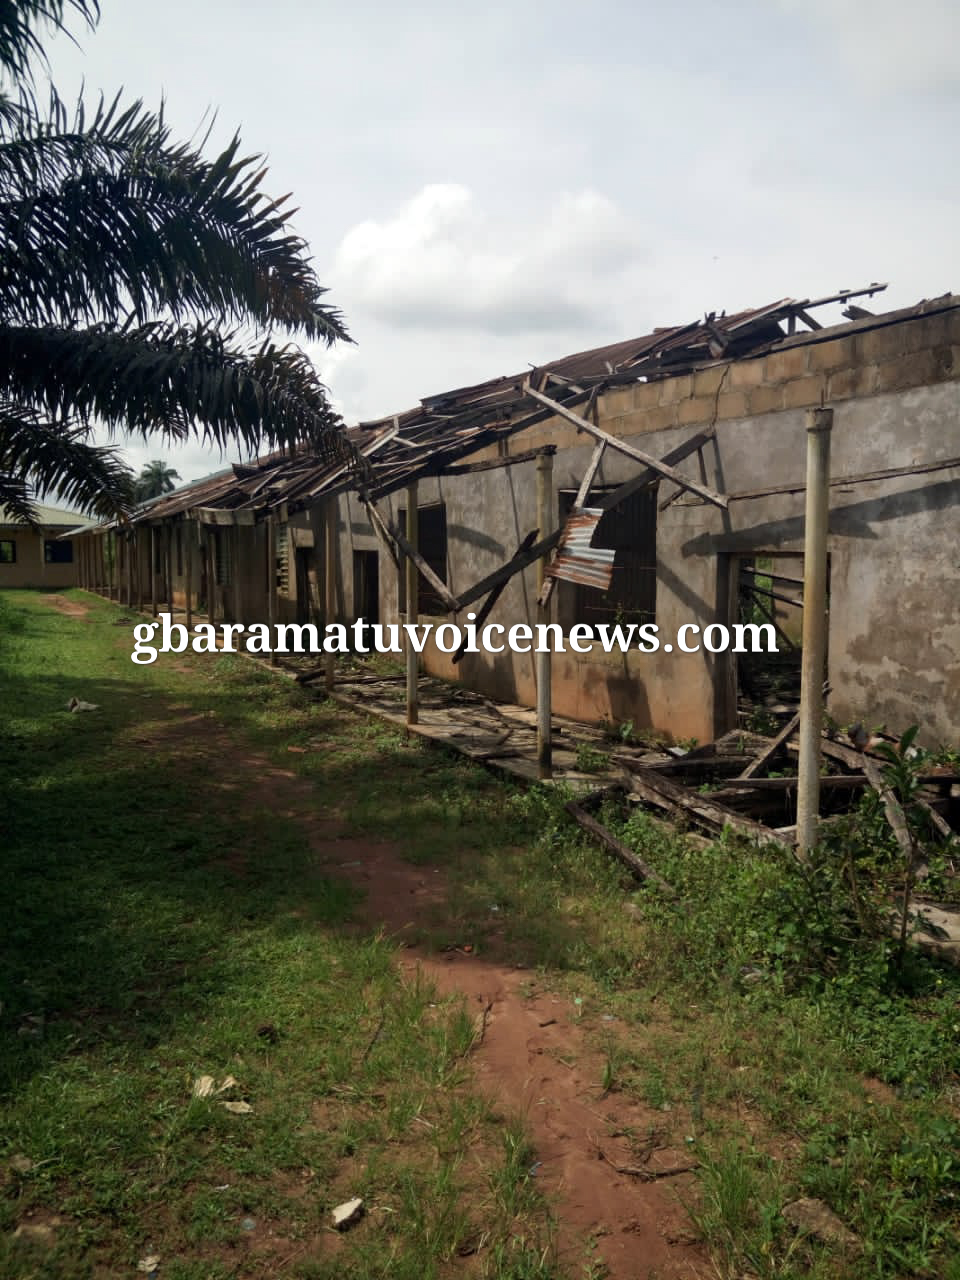 EYESORE: Deplorable state of St Charles College in Abavo, hometown of Gov. Okowa’s mother in Delta